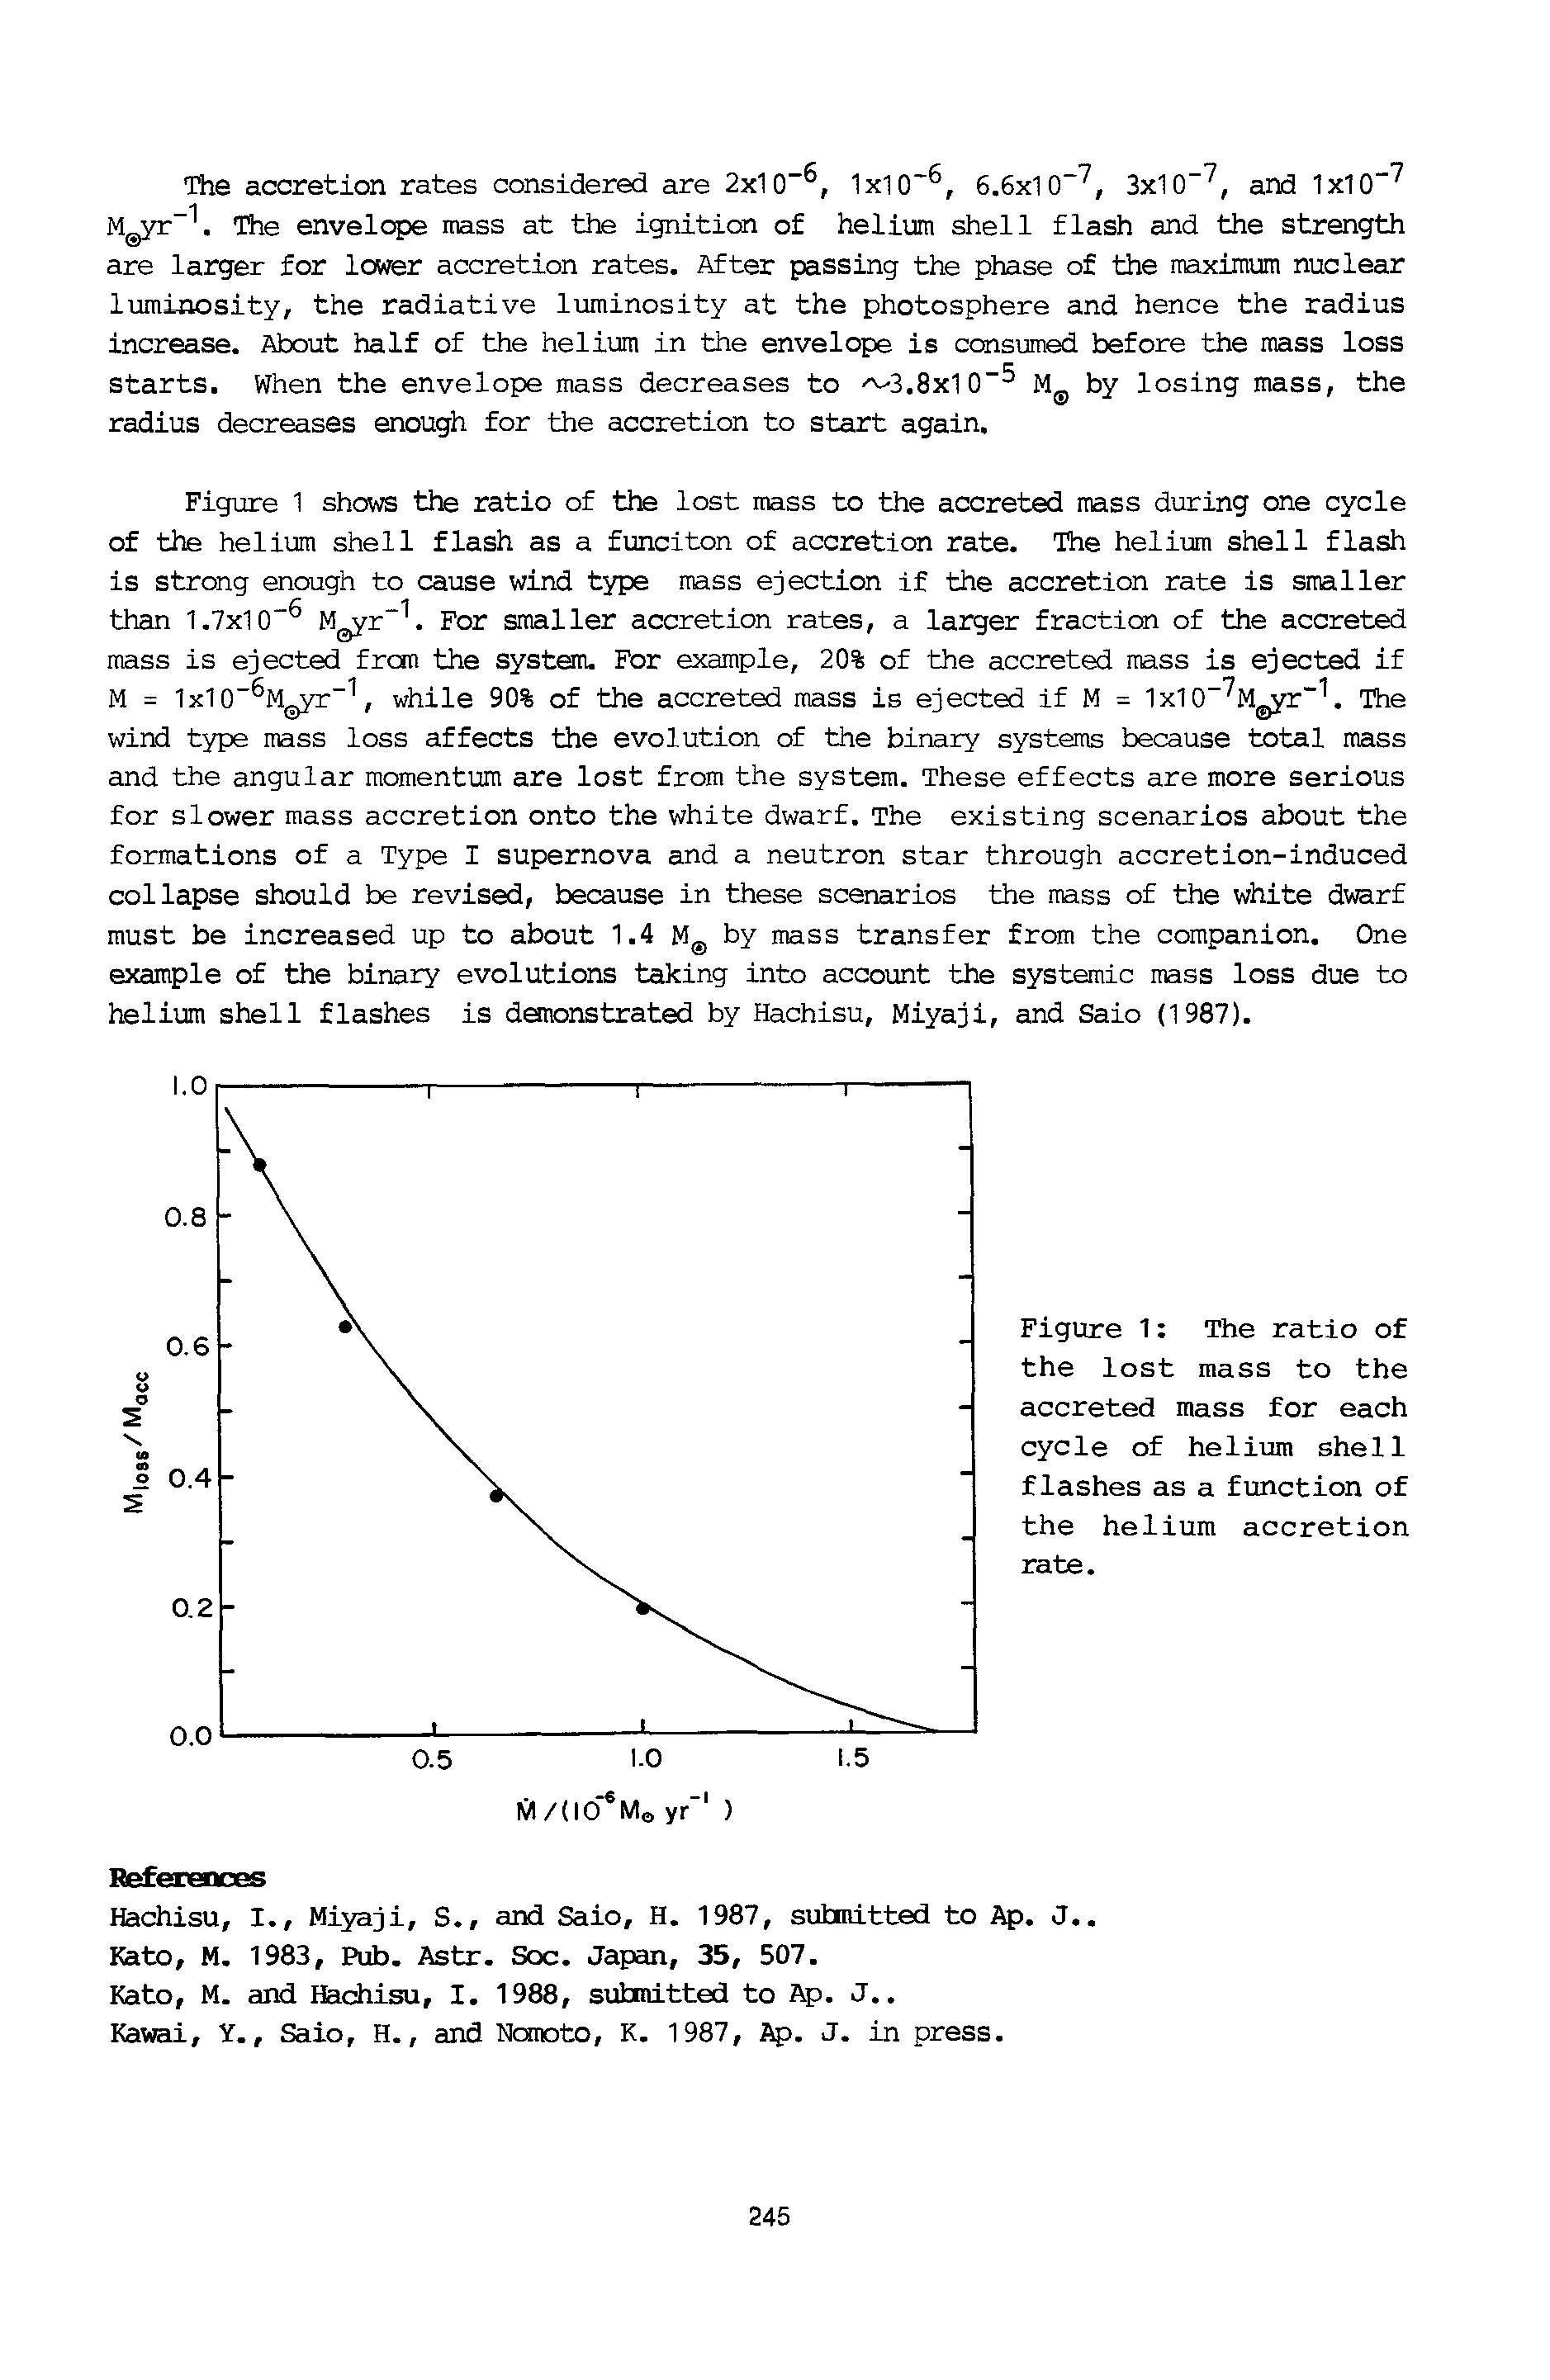 Figure 1 The ratio of the lost mass to the accreted mass for each cycle of helium shell flashes as a function of the helium accretion rate.